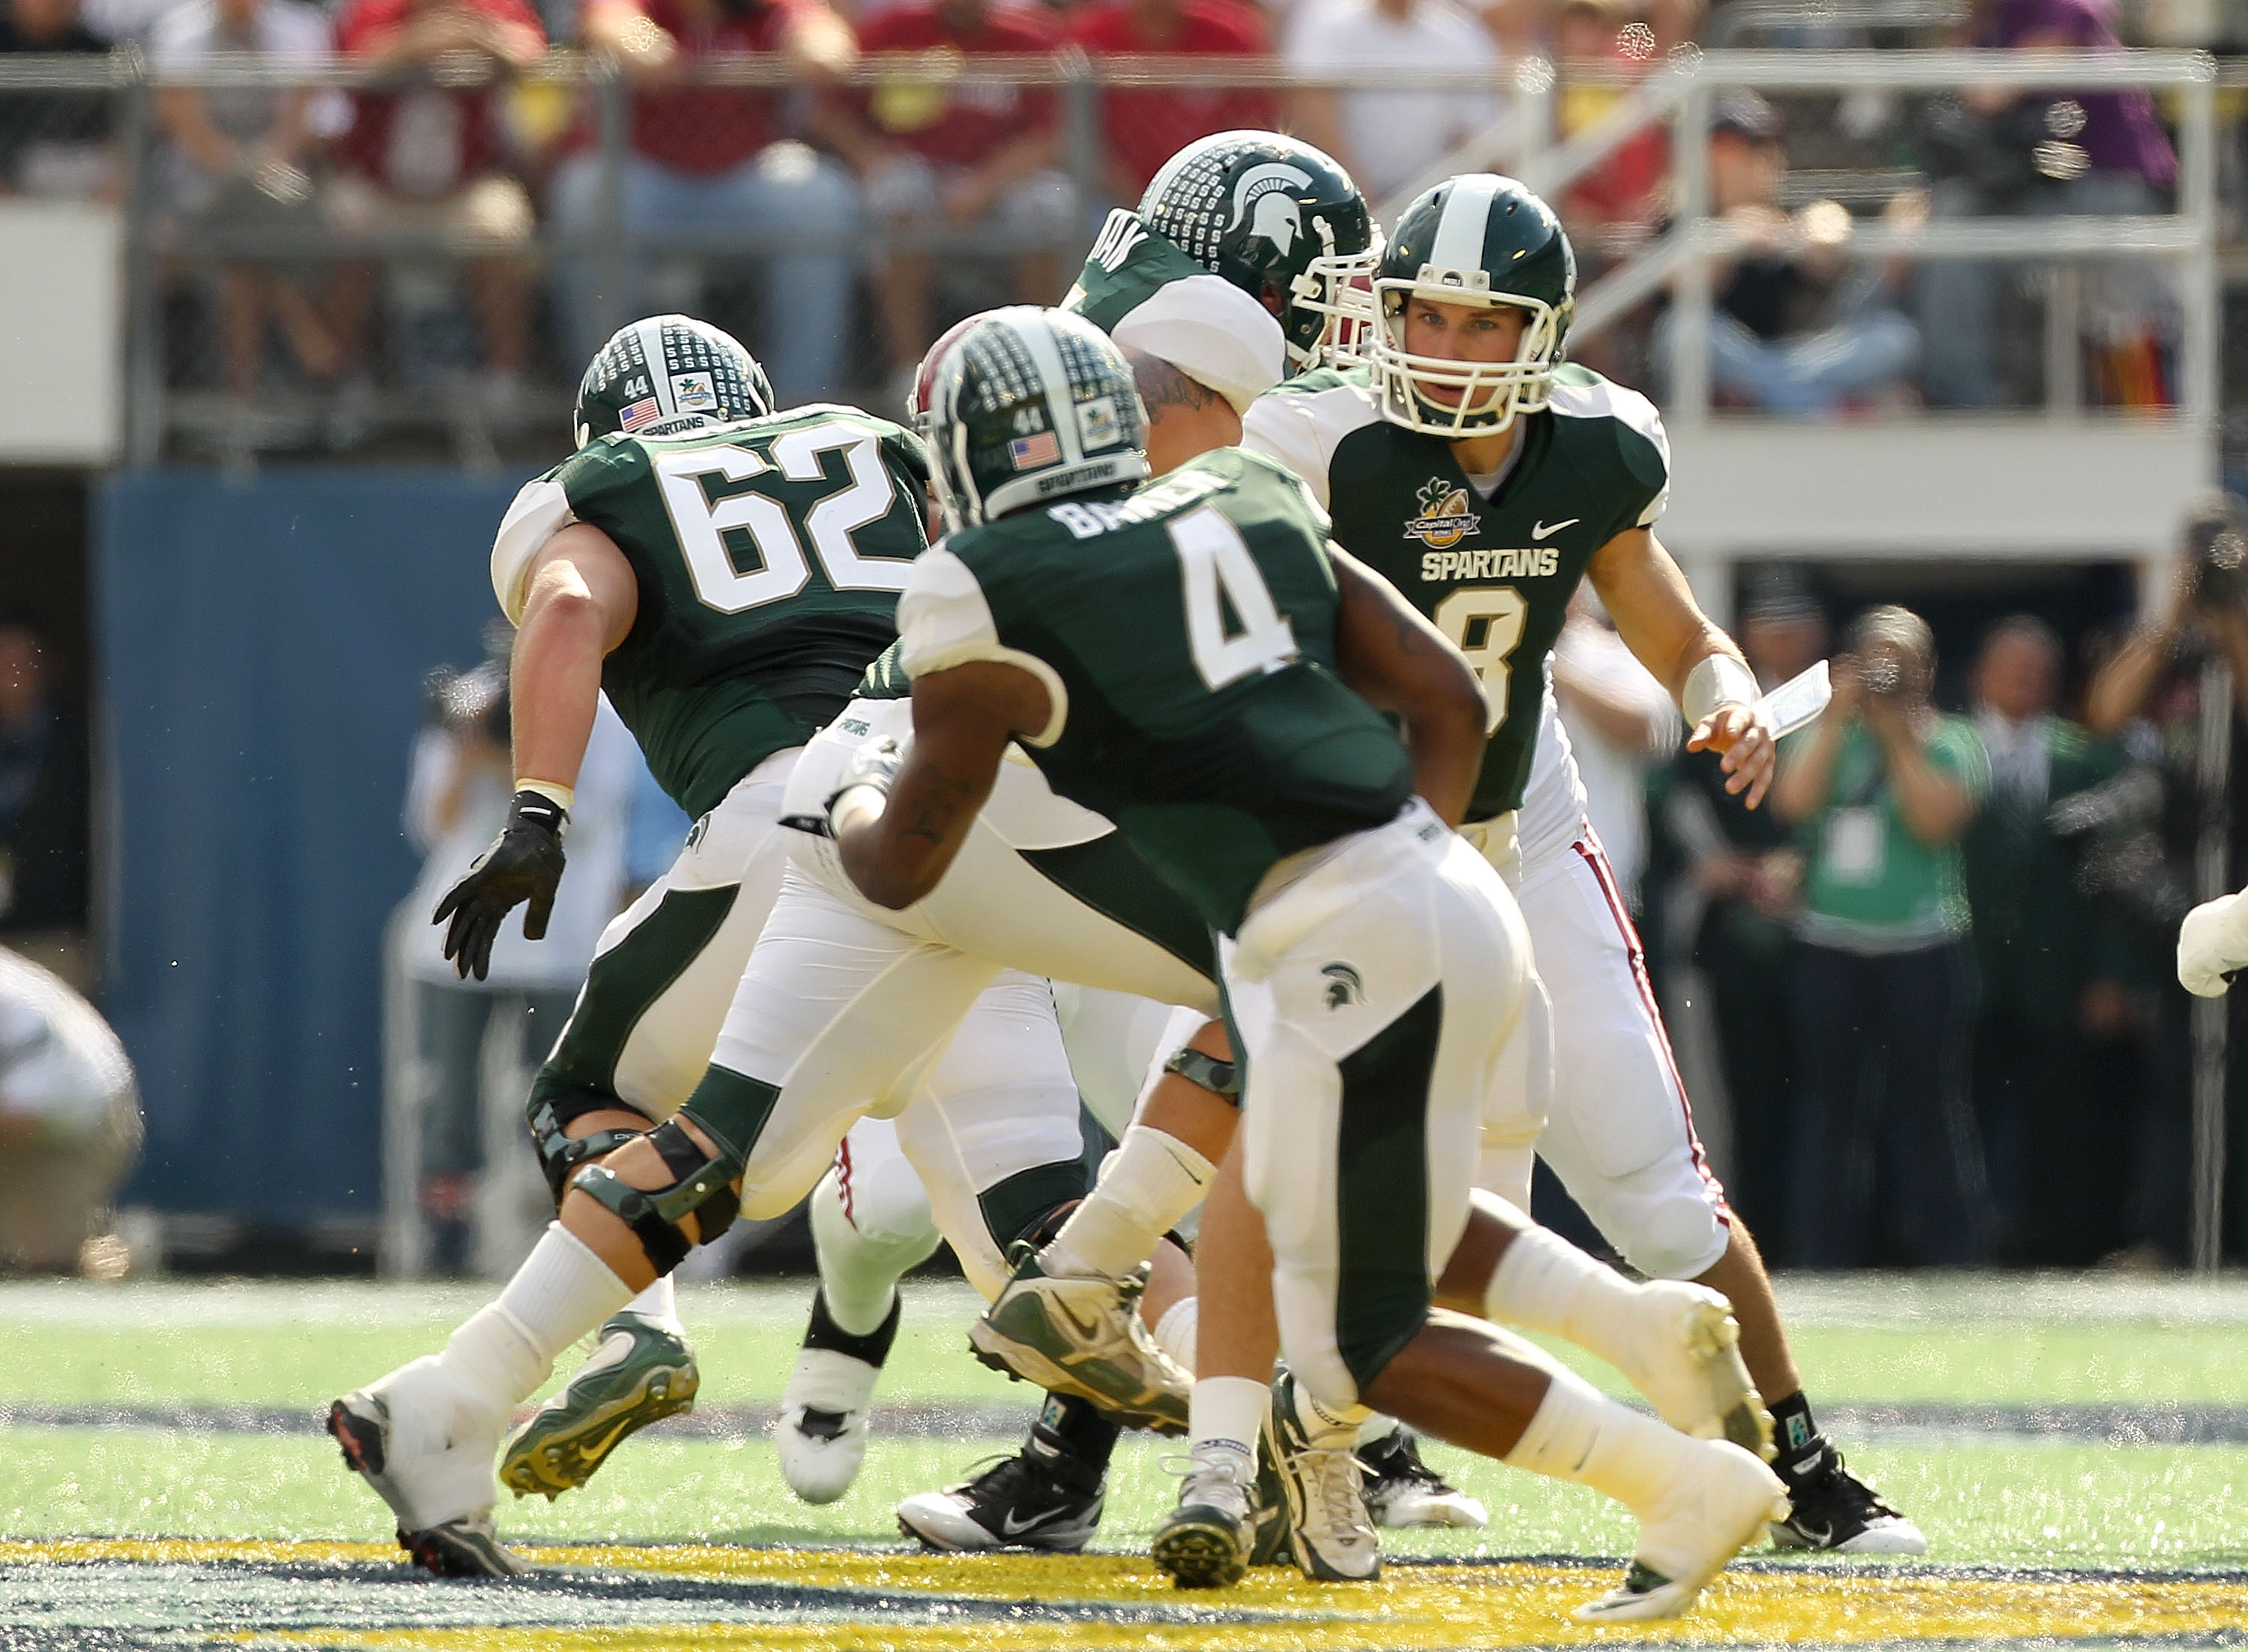 ORLANDO, FL - JANUARY 01:  Kirk Cousins #8 of the Michigan State Spartans hands the ball off to Edwin Baker #4 during the Capitol One Bowl against the Alabama Crimson Tide at the Florida Citrus Bowl on January 1, 2011 in Orlando, Florida.  (Photo by Mike